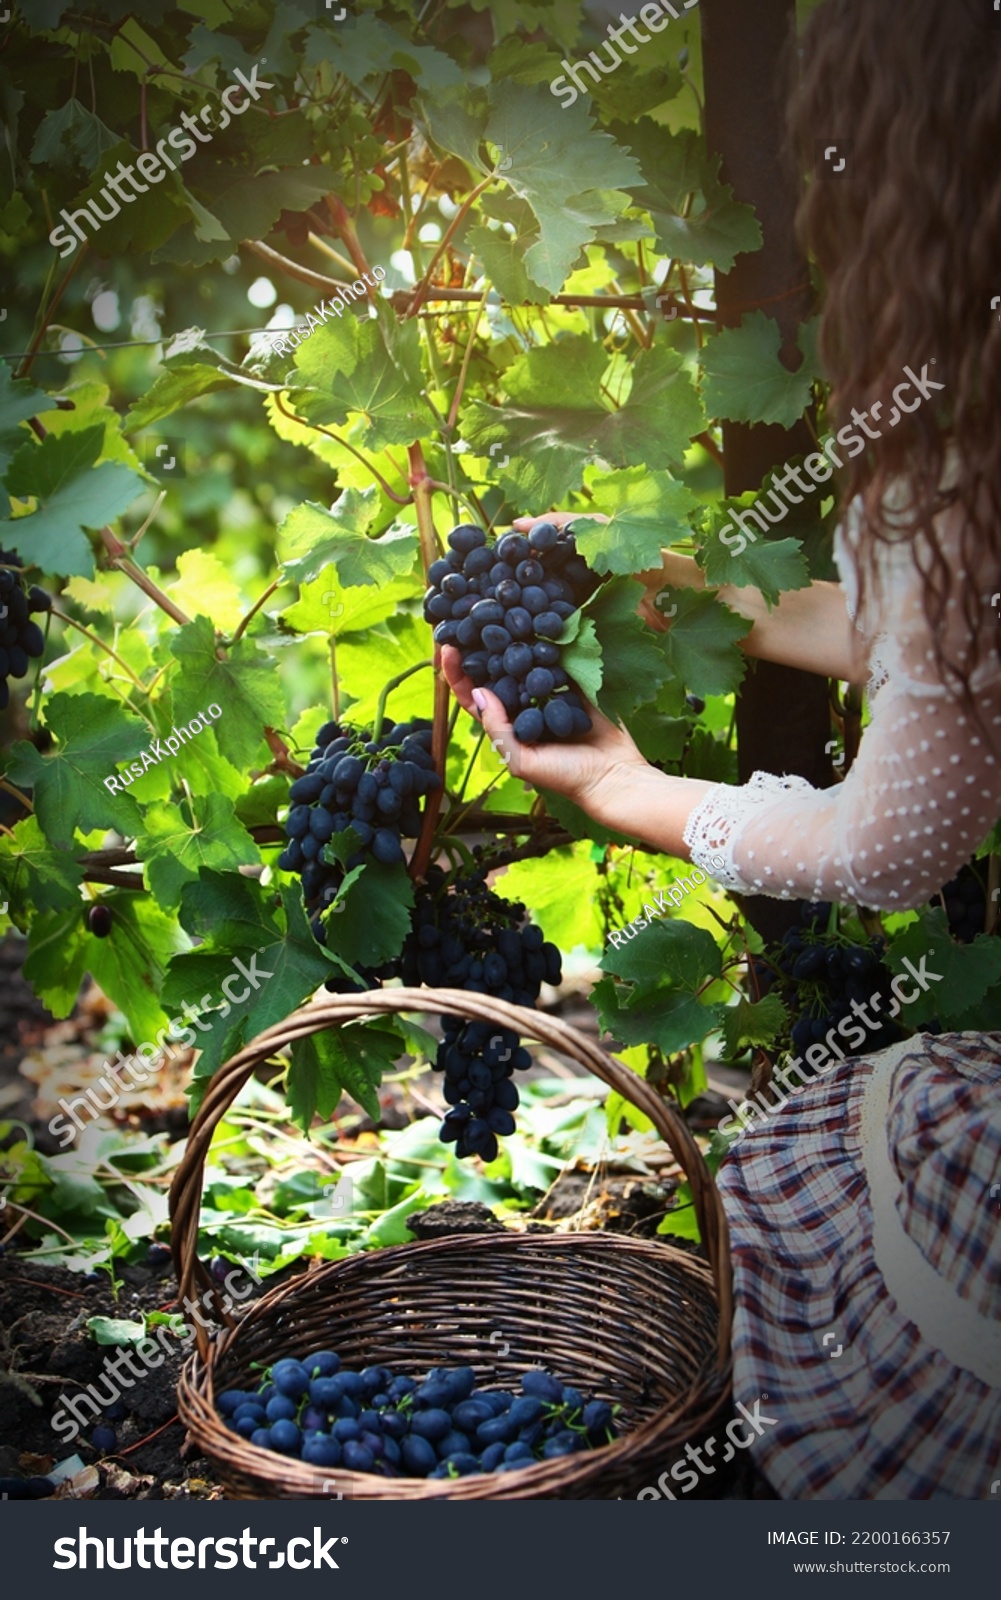 A woman cuts a ripe bunch of dark grapes. Basket with grapes. An unrecognizable person. Autumn harvest. The season of agricultural work. Vertical photo. #2200166357